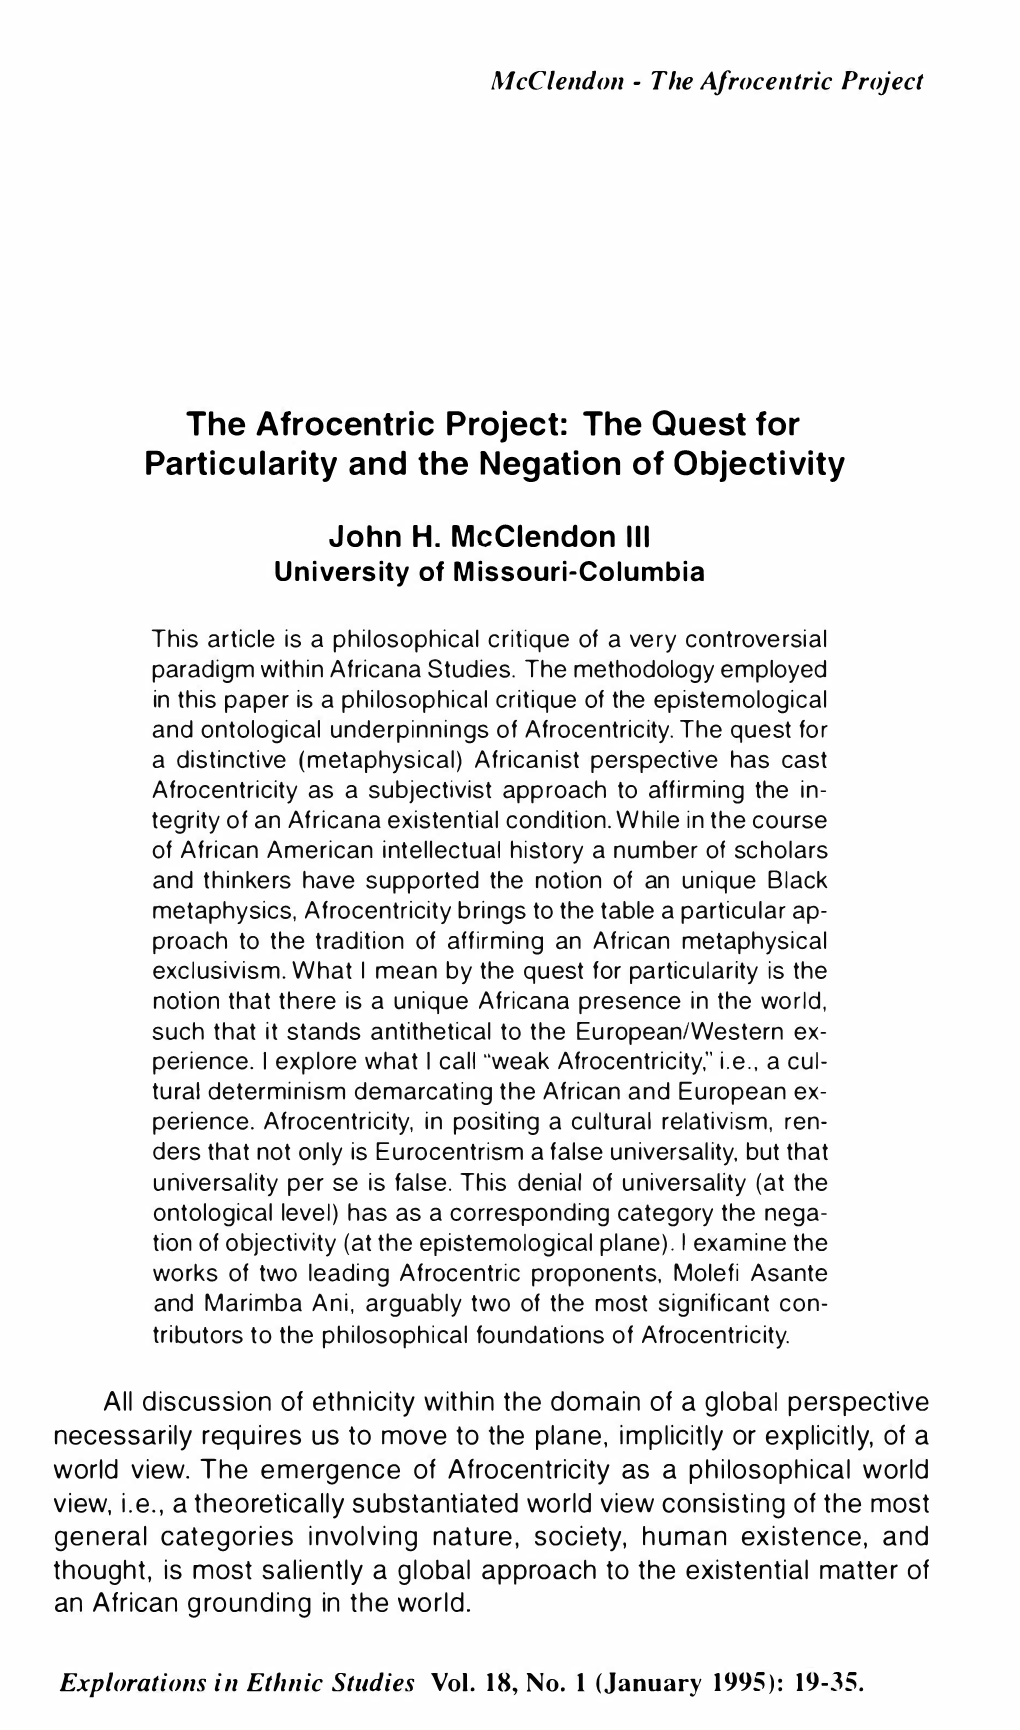 The Afrocentric Project: the Quest for Particularity and the Negation Of